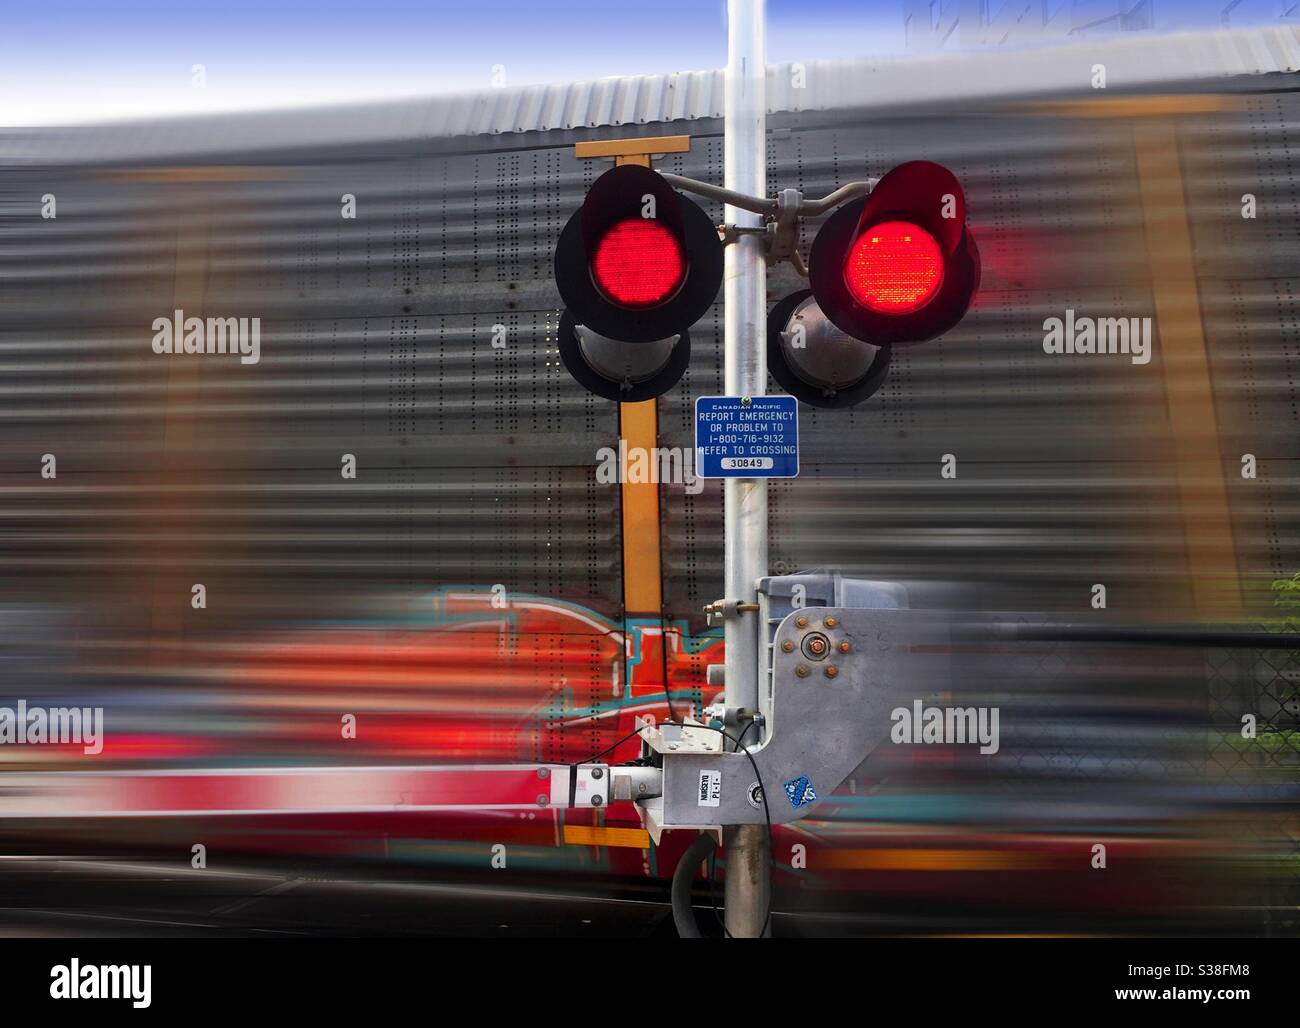 A freight train speeding past a railway crossing, Ontario, Canada. Red lights flashing. Concept, fast and slow, fixed and moving, danger approaching. Risky, caution, transient, fleeting, momentary Stock Photo